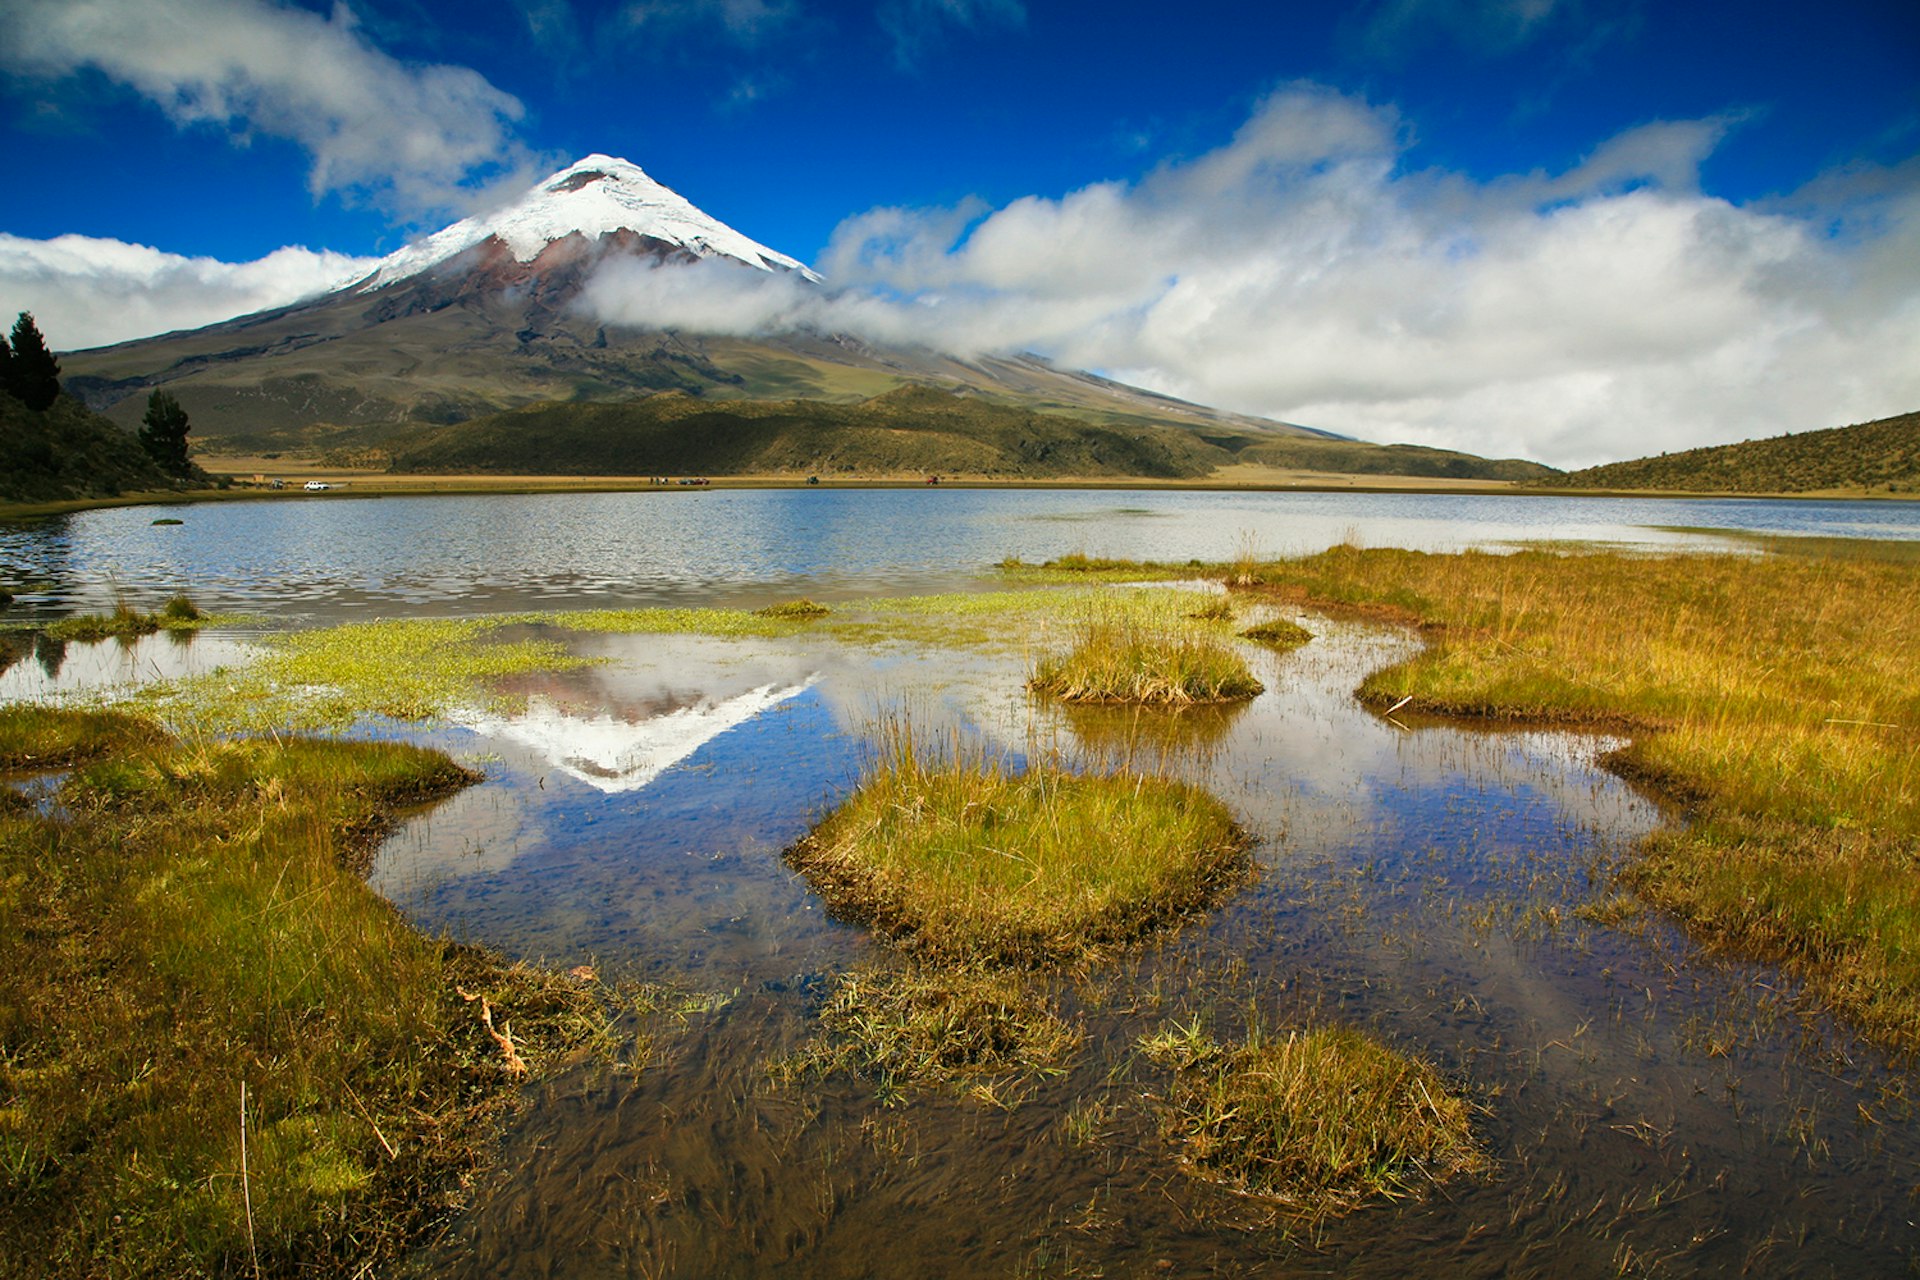 Cotopaxi Volcano © Andras Jancsik / Getty Images 